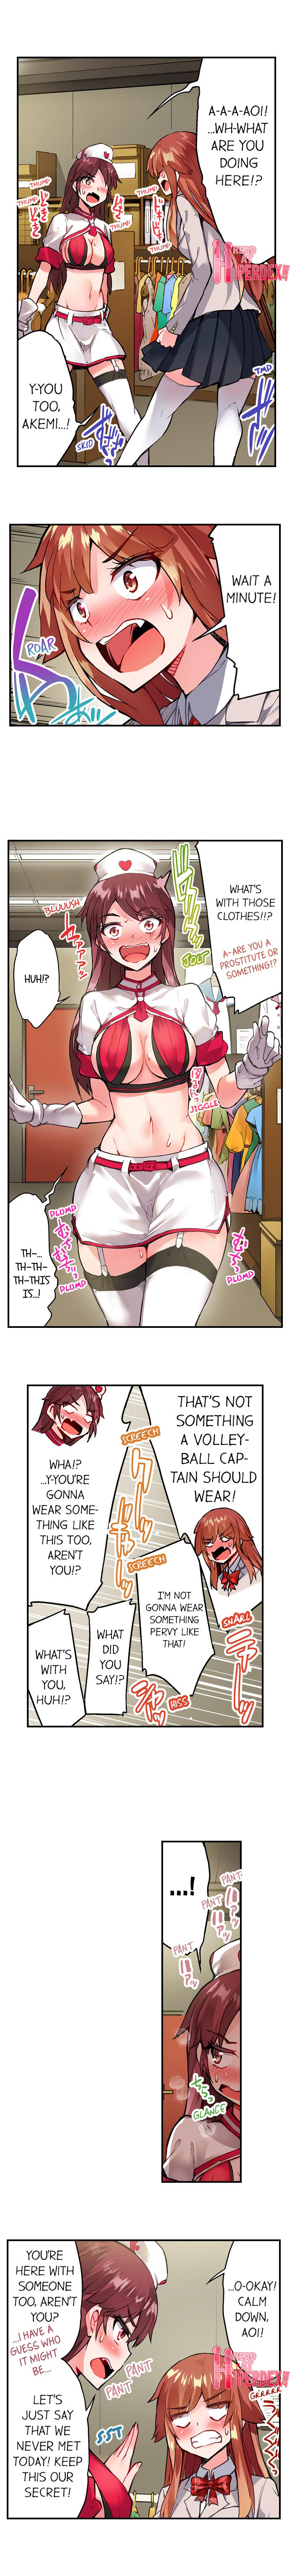 Traditional Job of Washing Girls’ Body - Chapter 112 Page 3